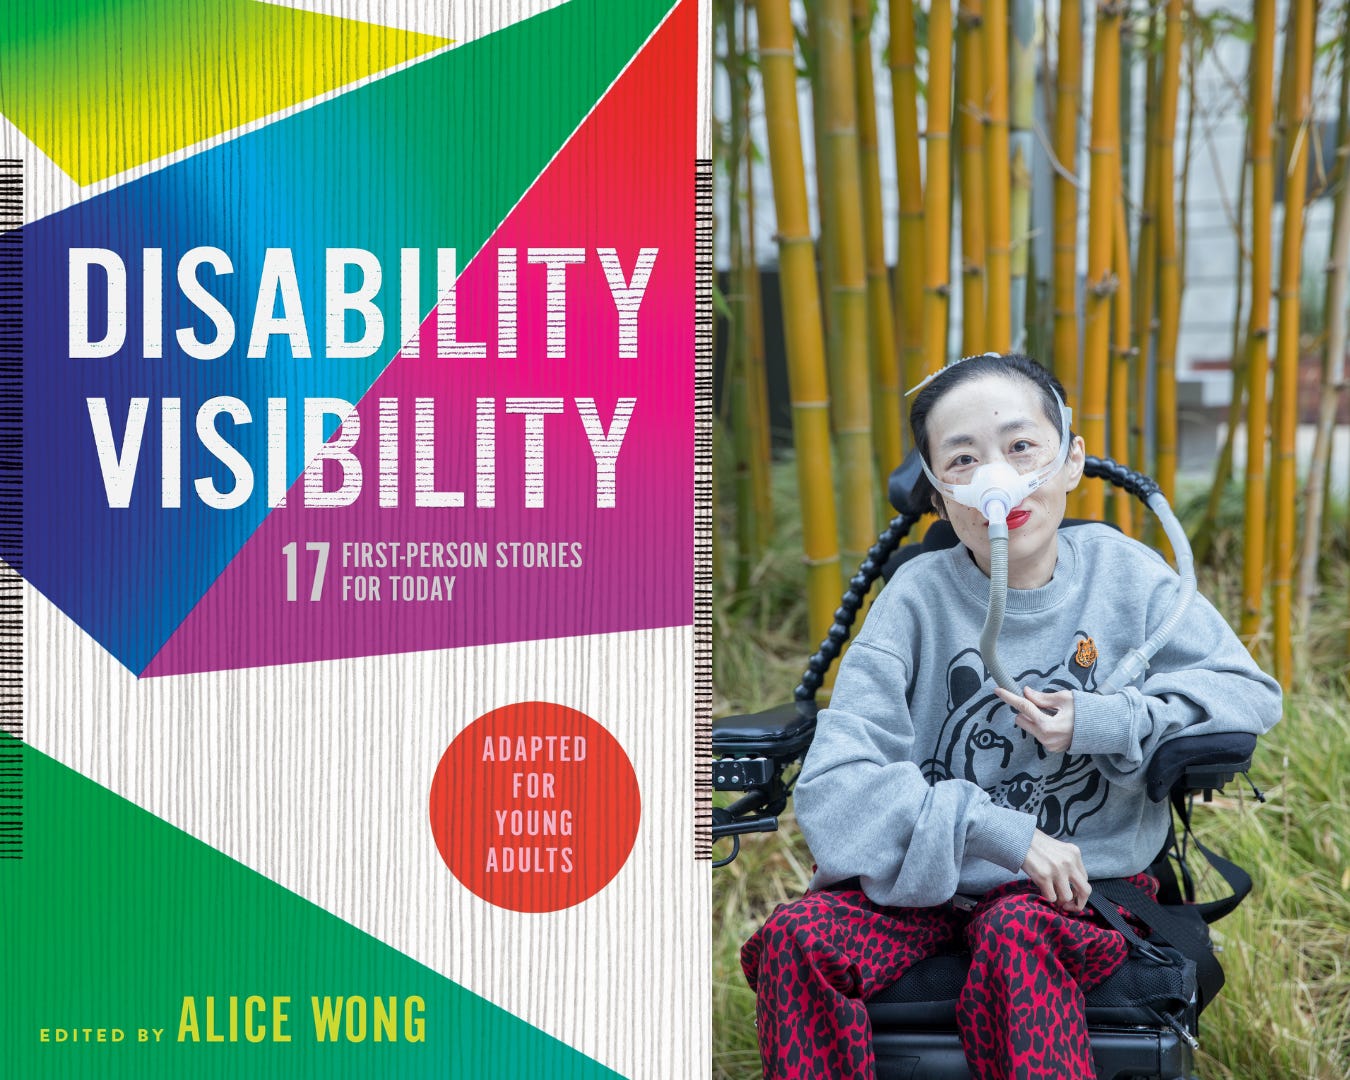 [left] Book jacket designed by Angela Carlino of DISABILITY VISIBILITY: 17 First-Person Stories for Today adapted for young readers edited by Alice Wong. The cover has thin vertical gray lines with overlapping geometric shapes in green, blue, magenta, yellow and purple. [right] Photo of Alice Wong, an Asian American disabled woman with a mask over her nose attached to a tube for her ventilator. She is in a power wheelchair and wearing a gray sweatshirt with a tiger and leopard-print red and black pants. Behind her are bamboo trees. Credit: Eddie Hernandez Photography